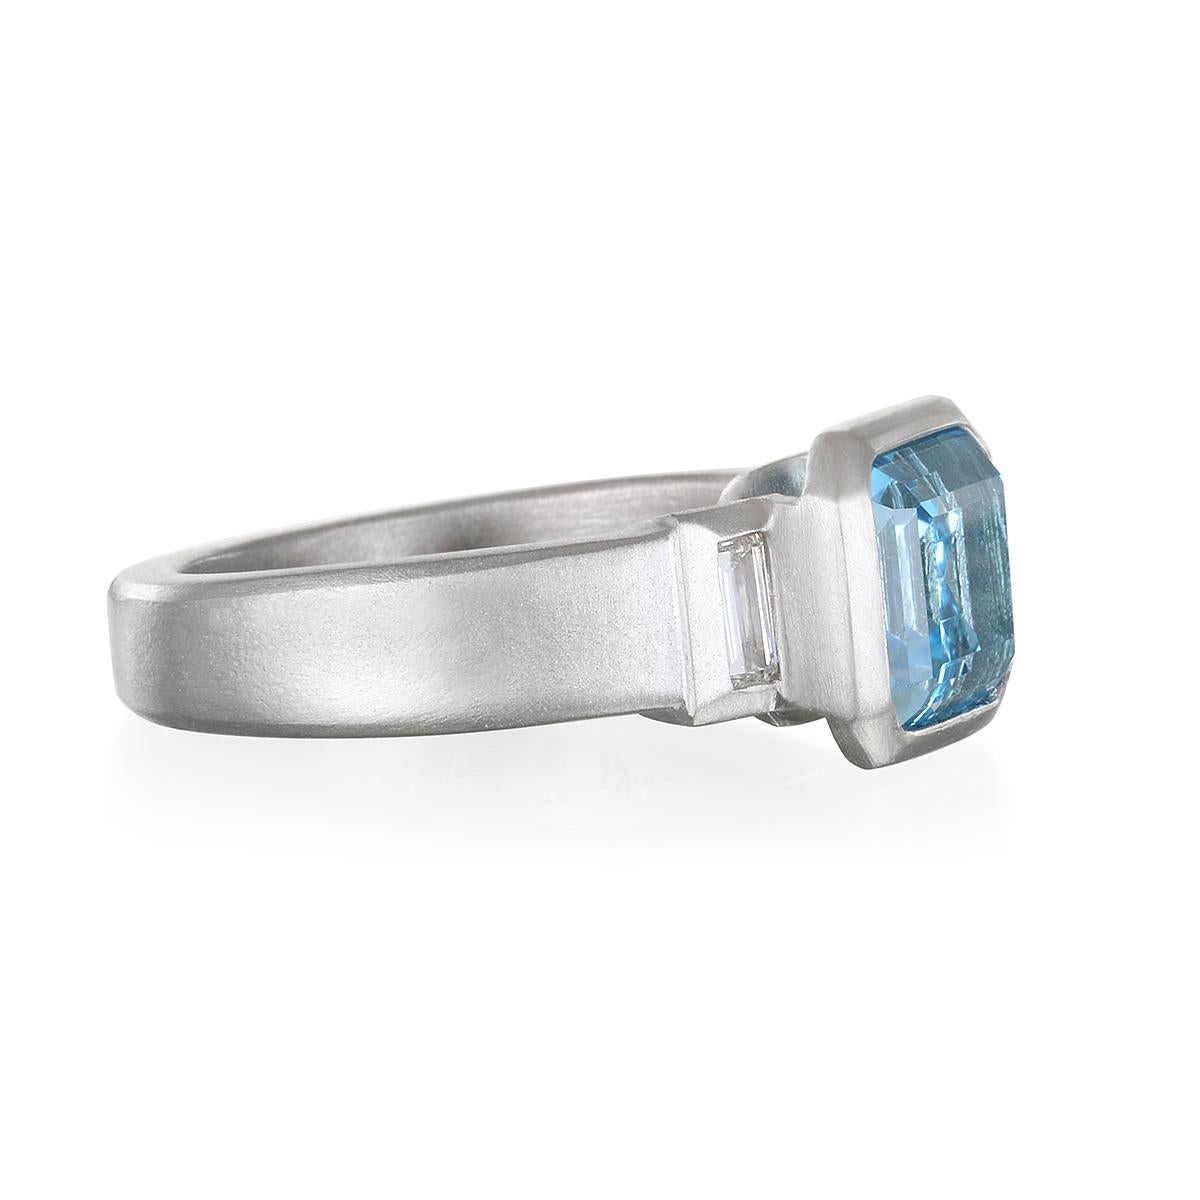 Designer Faye Kim had set this spectacular aquamarine in matte-finished platinum and paired it with two side diamonds. Used in jewelry since at least 500 BC, aquamarine's tropical ocean blue tones effortlessly invoke images of landless skies and the